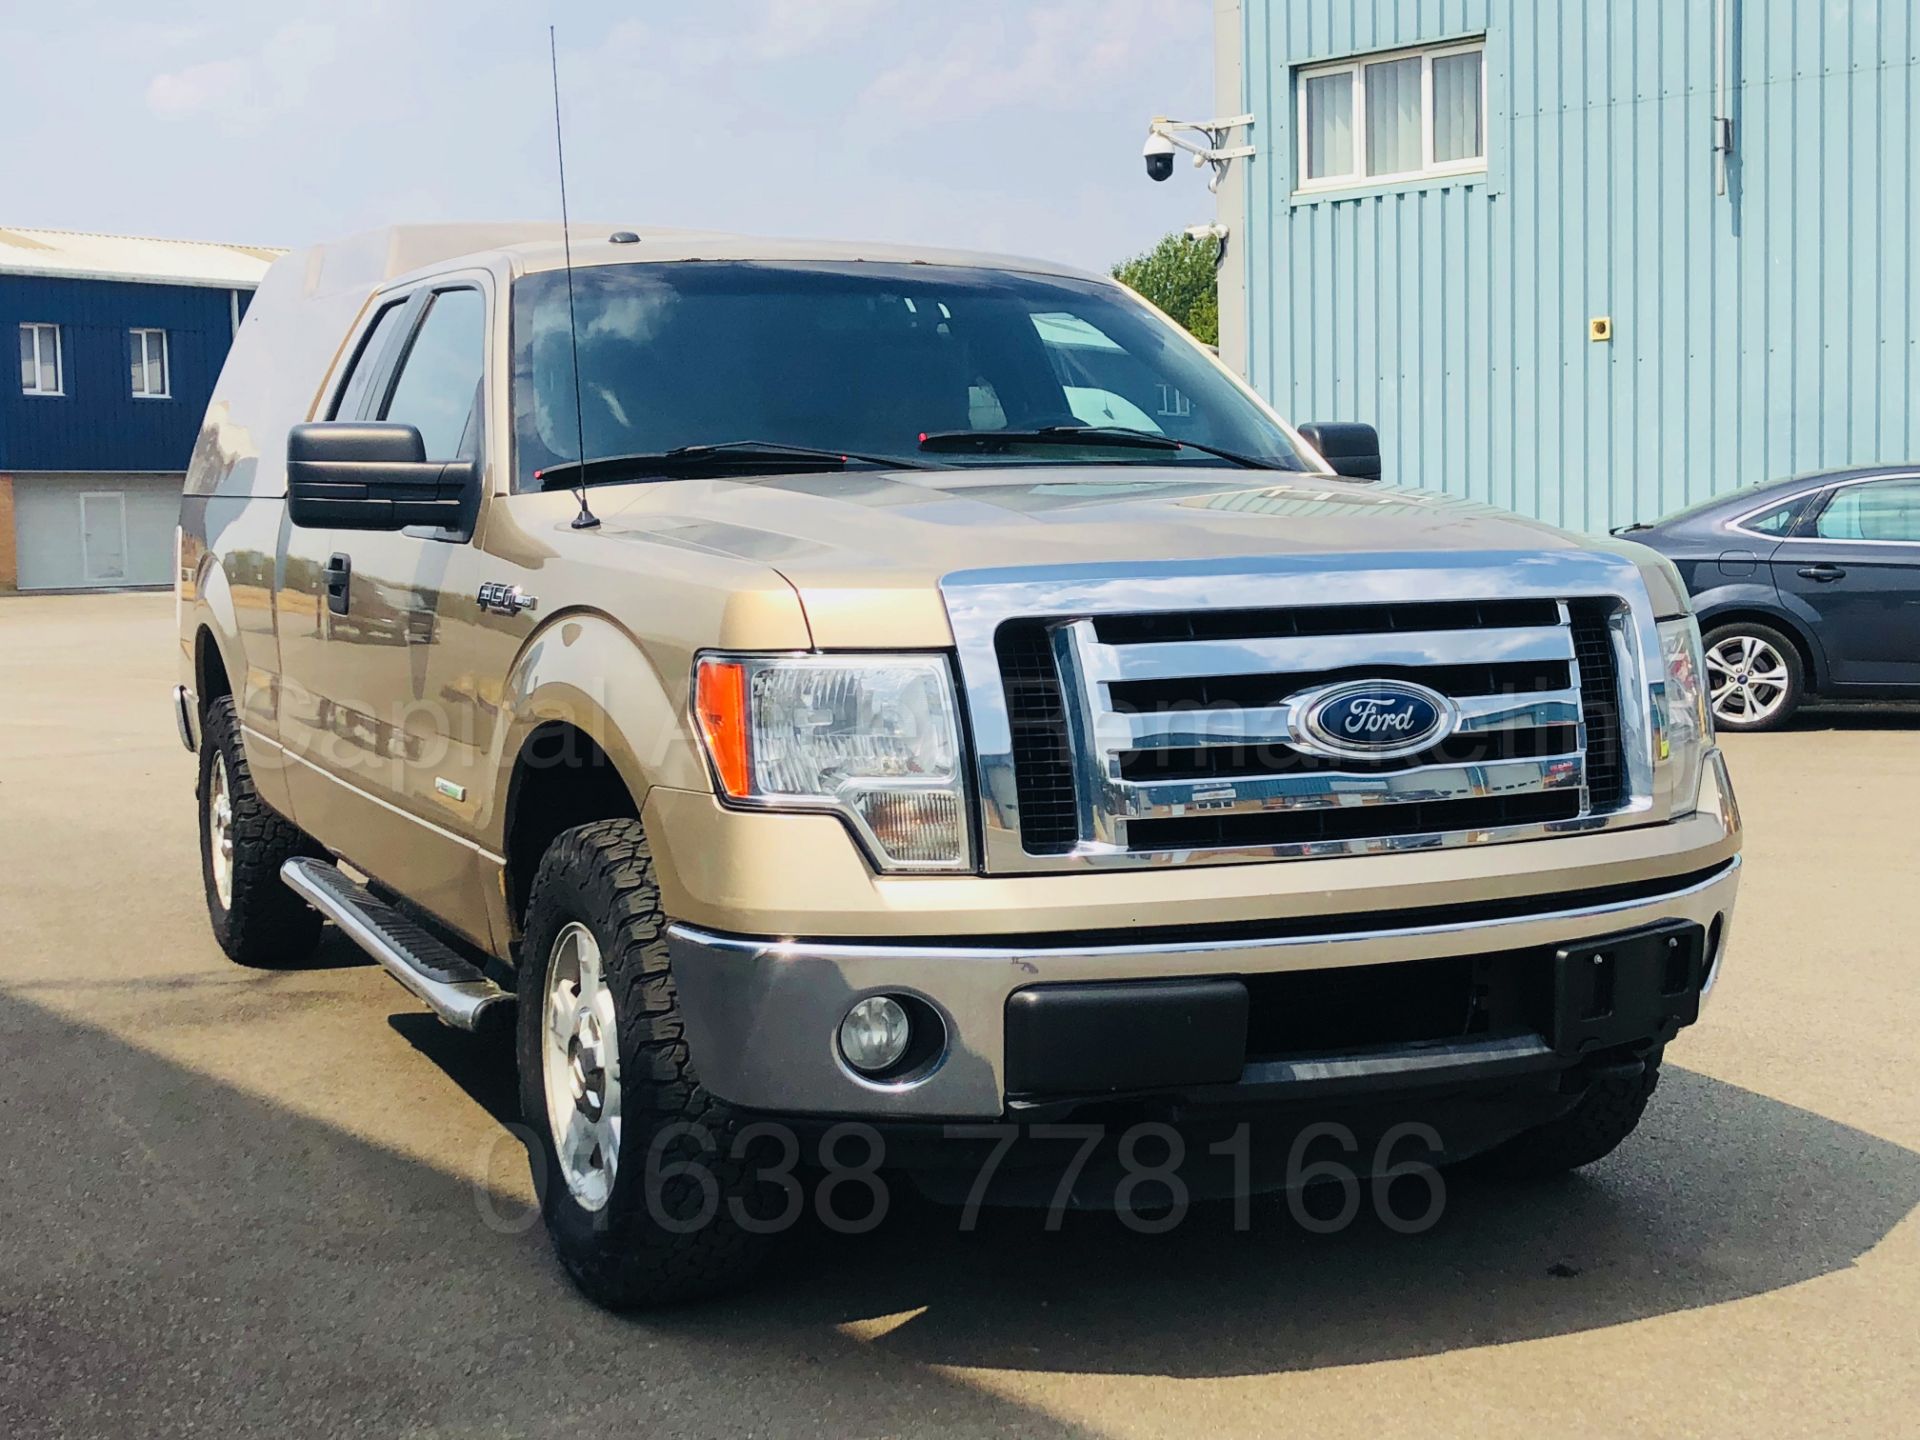 (On Sale) FORD F-150 5.4 V8 XLT EDITION KING-CAB (2012) MODEL**4X4**6 SEATER**AUTOMATIC *TOP SPEC* - Bild 7 aus 52